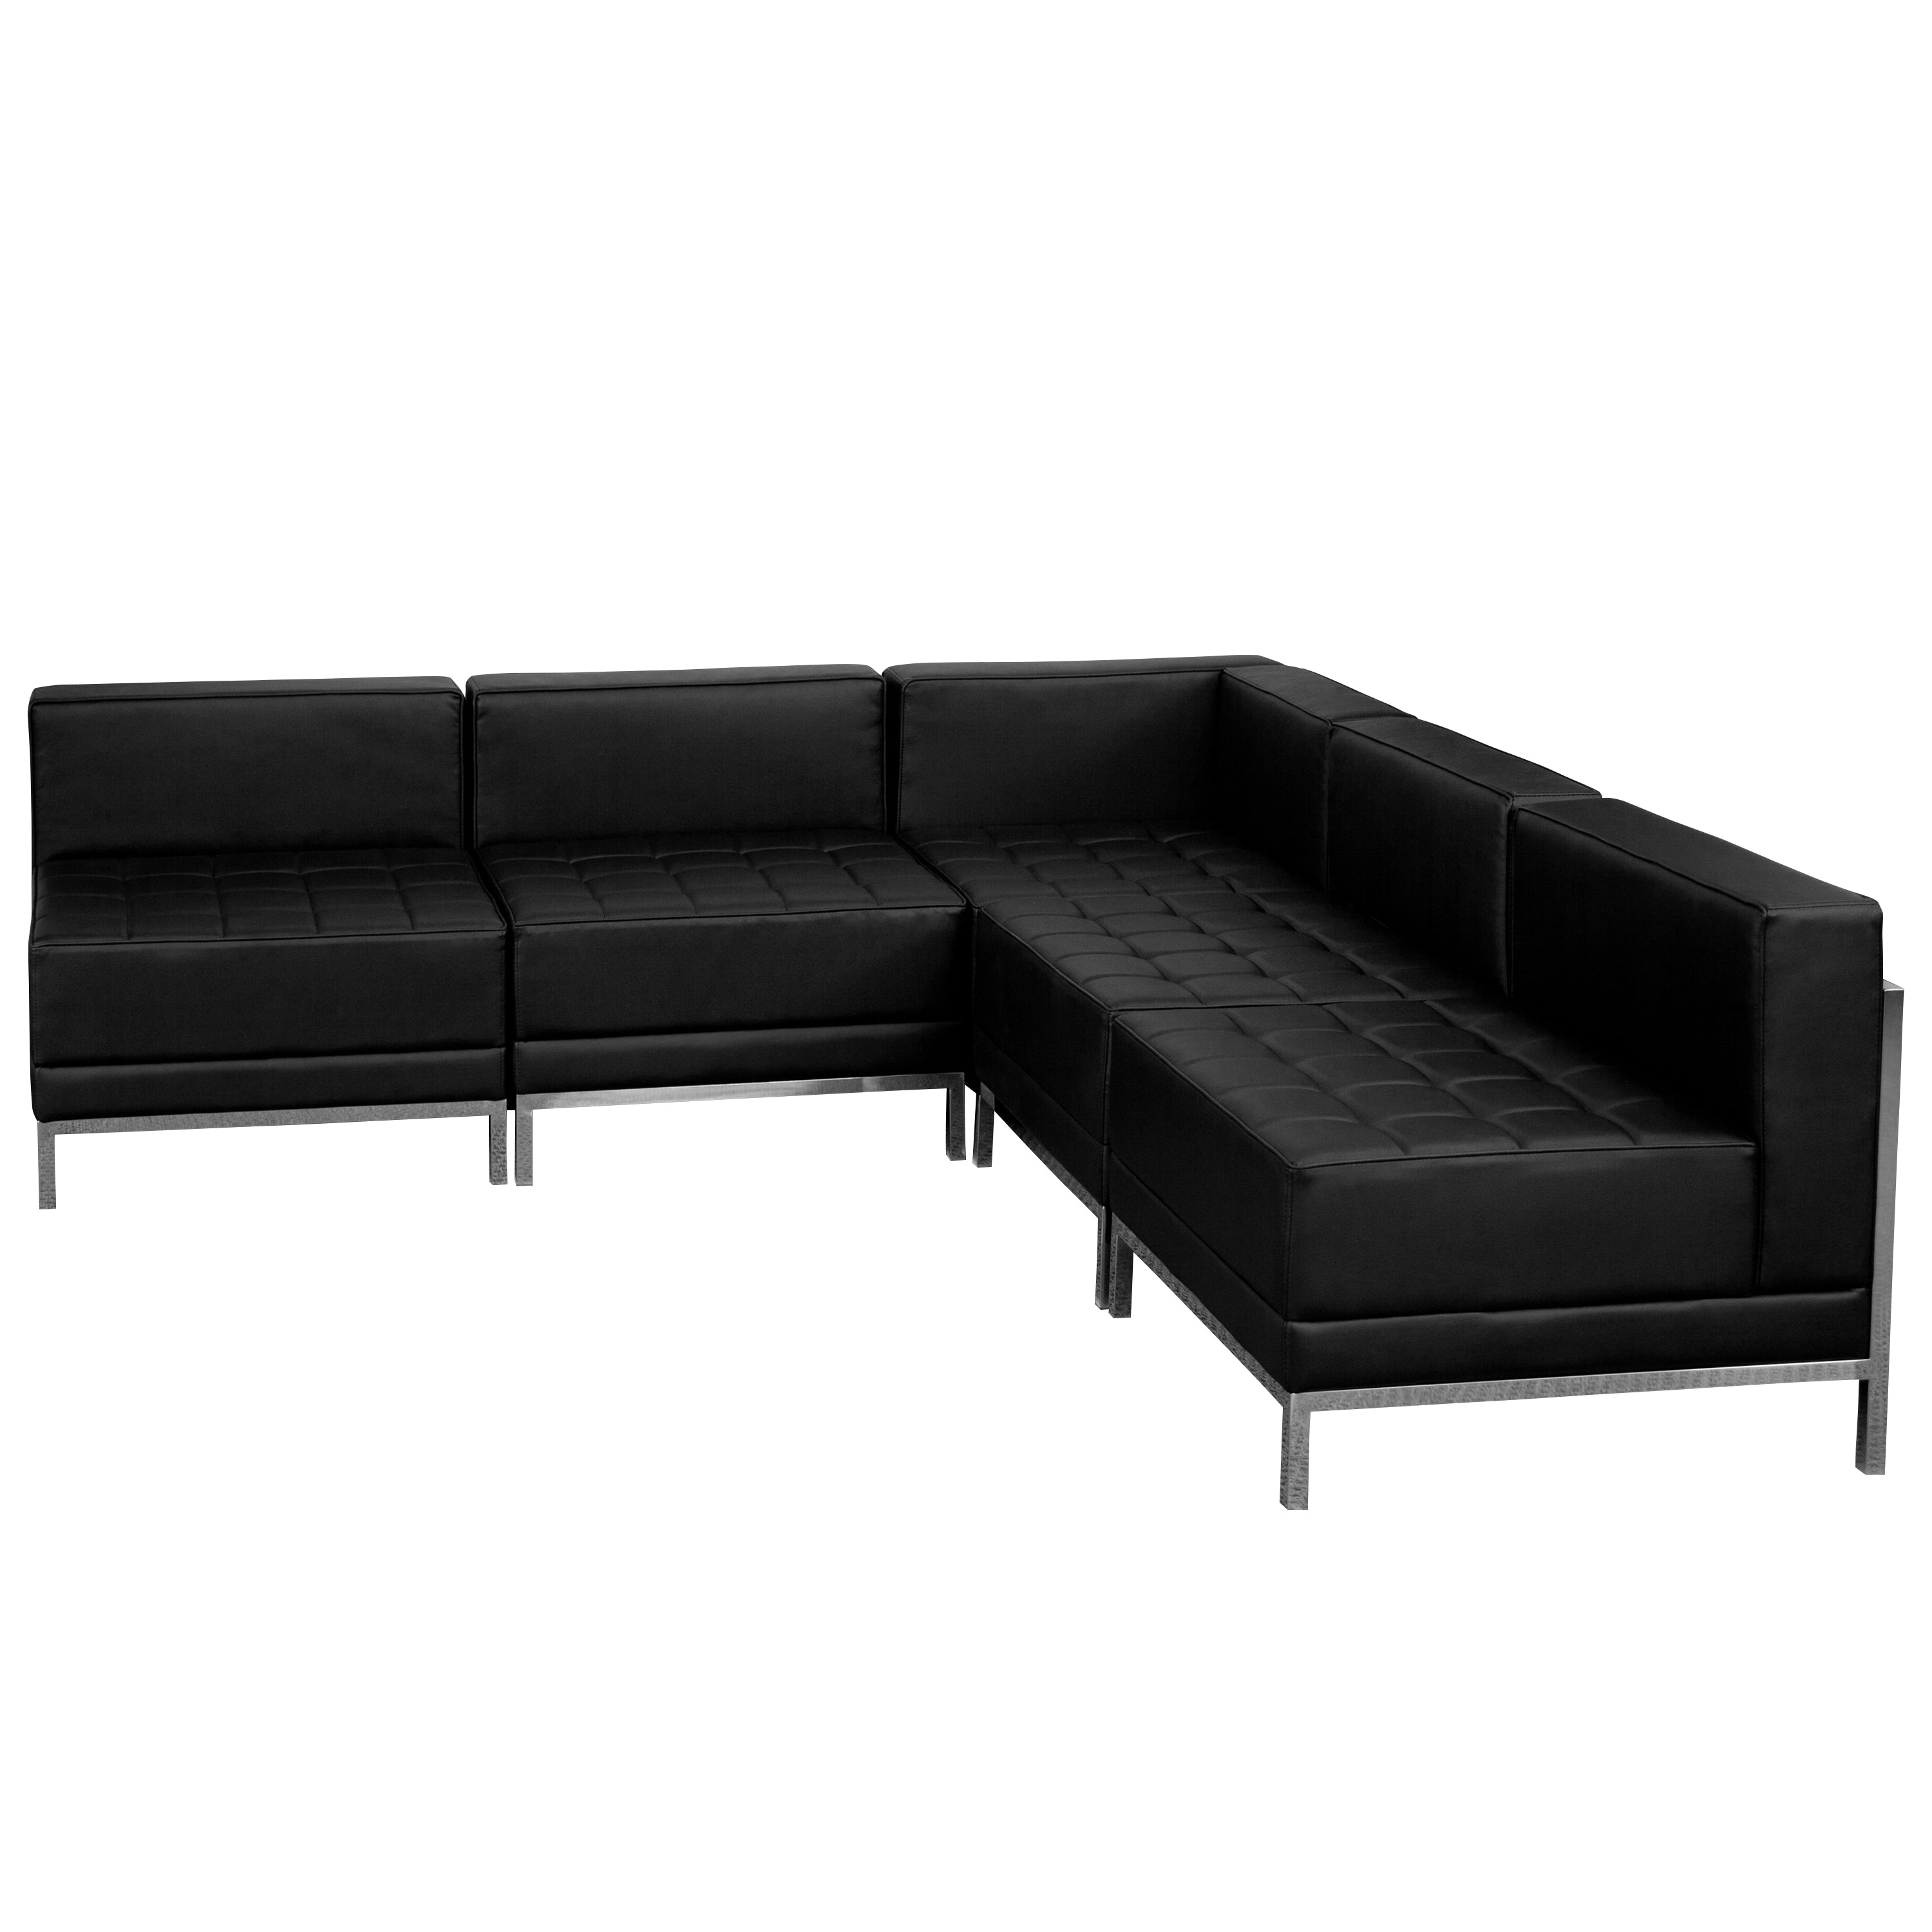 HERCULES Imagination Series LeatherSoft Sectional Configuration, 5 Pieces-Modular Reception Set-Flash Furniture-Wall2Wall Furnishings